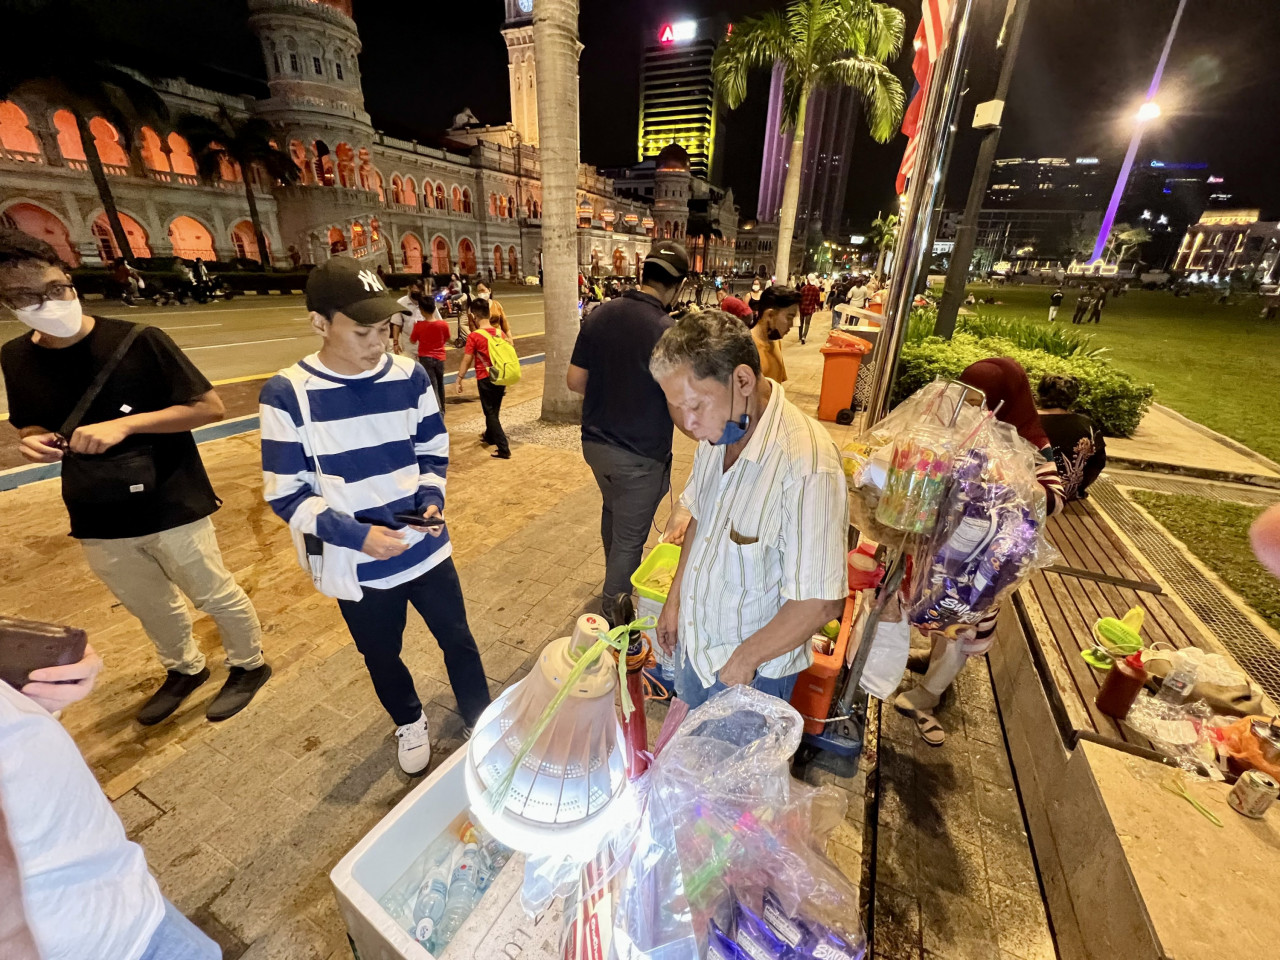 Vendor Samad Ali, 59, who sold drinks and snacks at the square for the past month noted that sales have been quite satisfactory. — The Vibes/Amalina Kamal